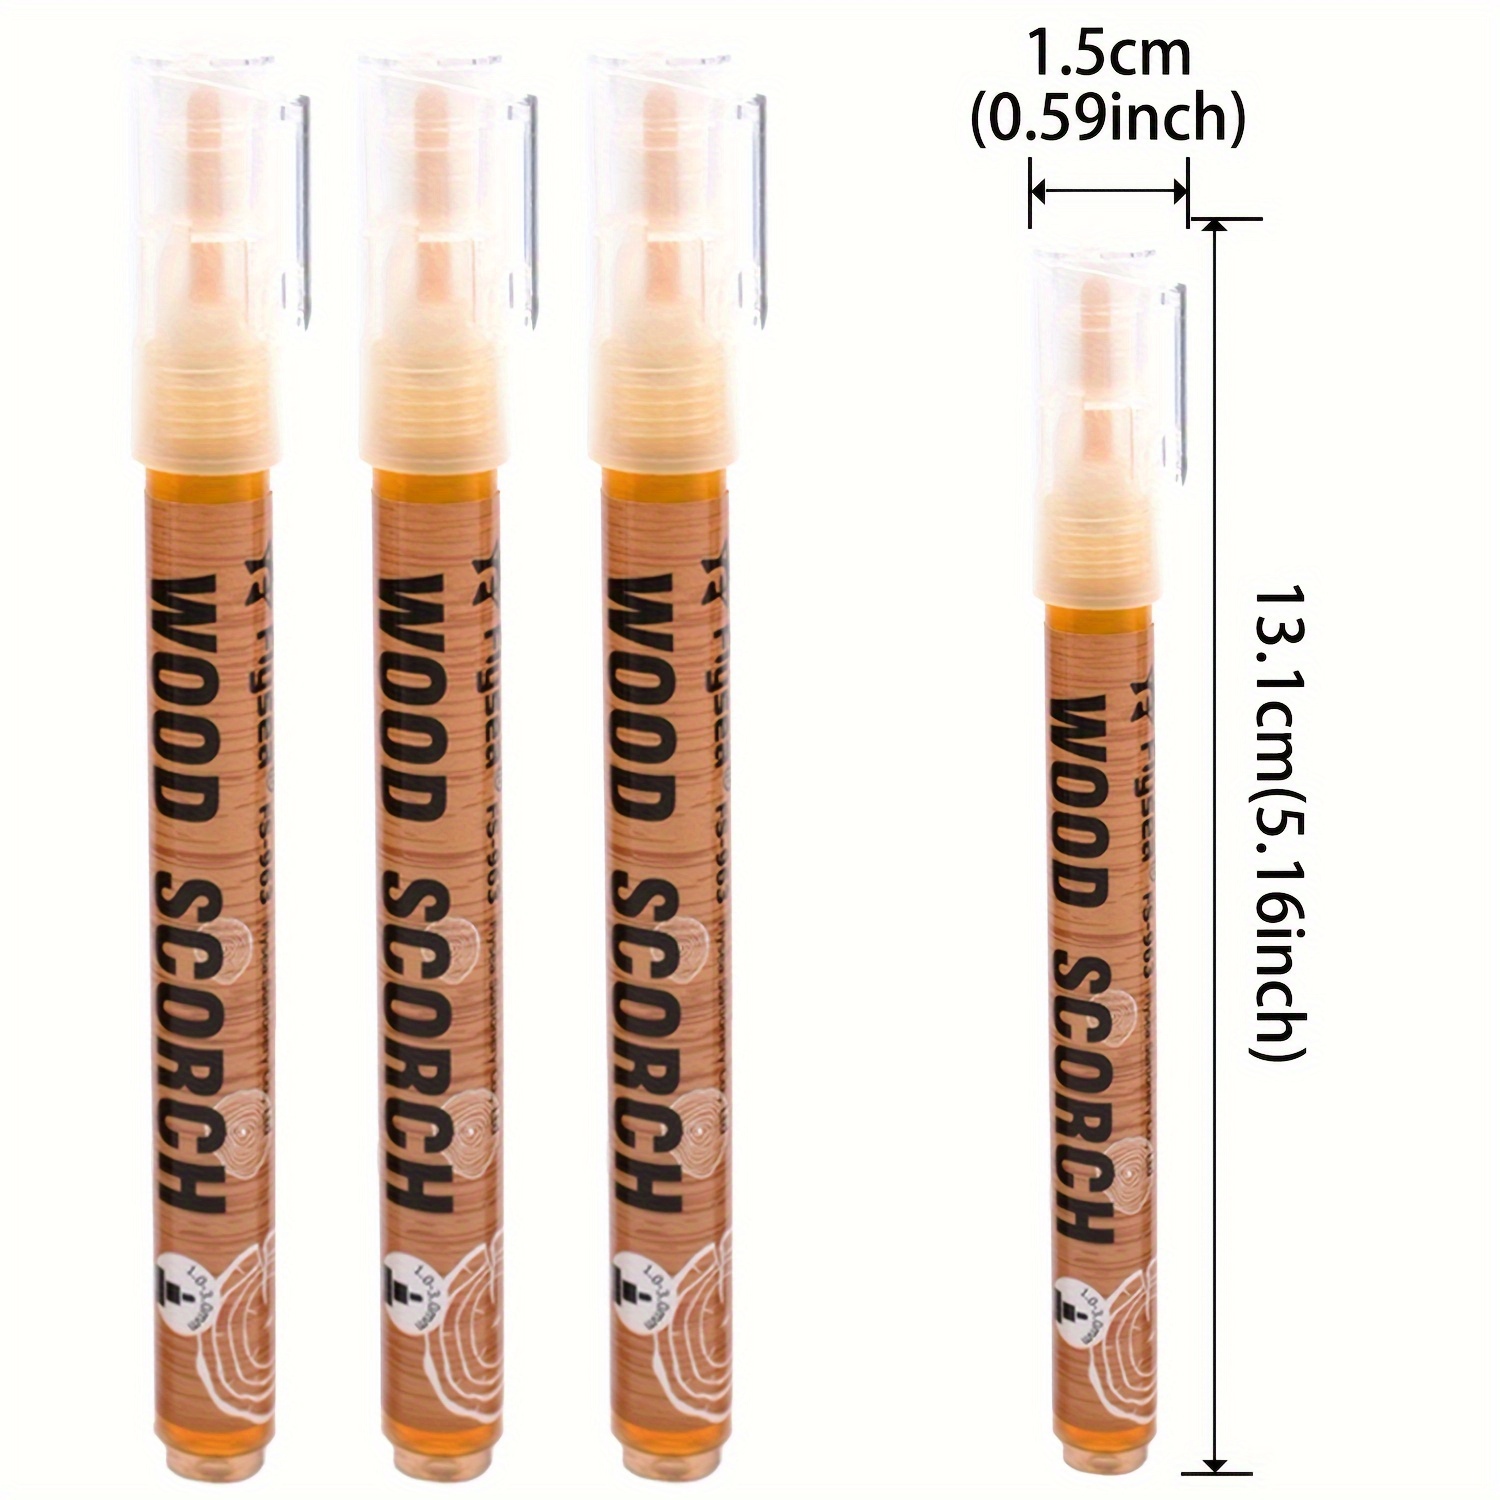 5ml Quick Creative Wood Burning Pen Torch Paste Set Scorch Pen Markers For  DIY Wood Painting Suitable For Artists And Beginners - AliExpress